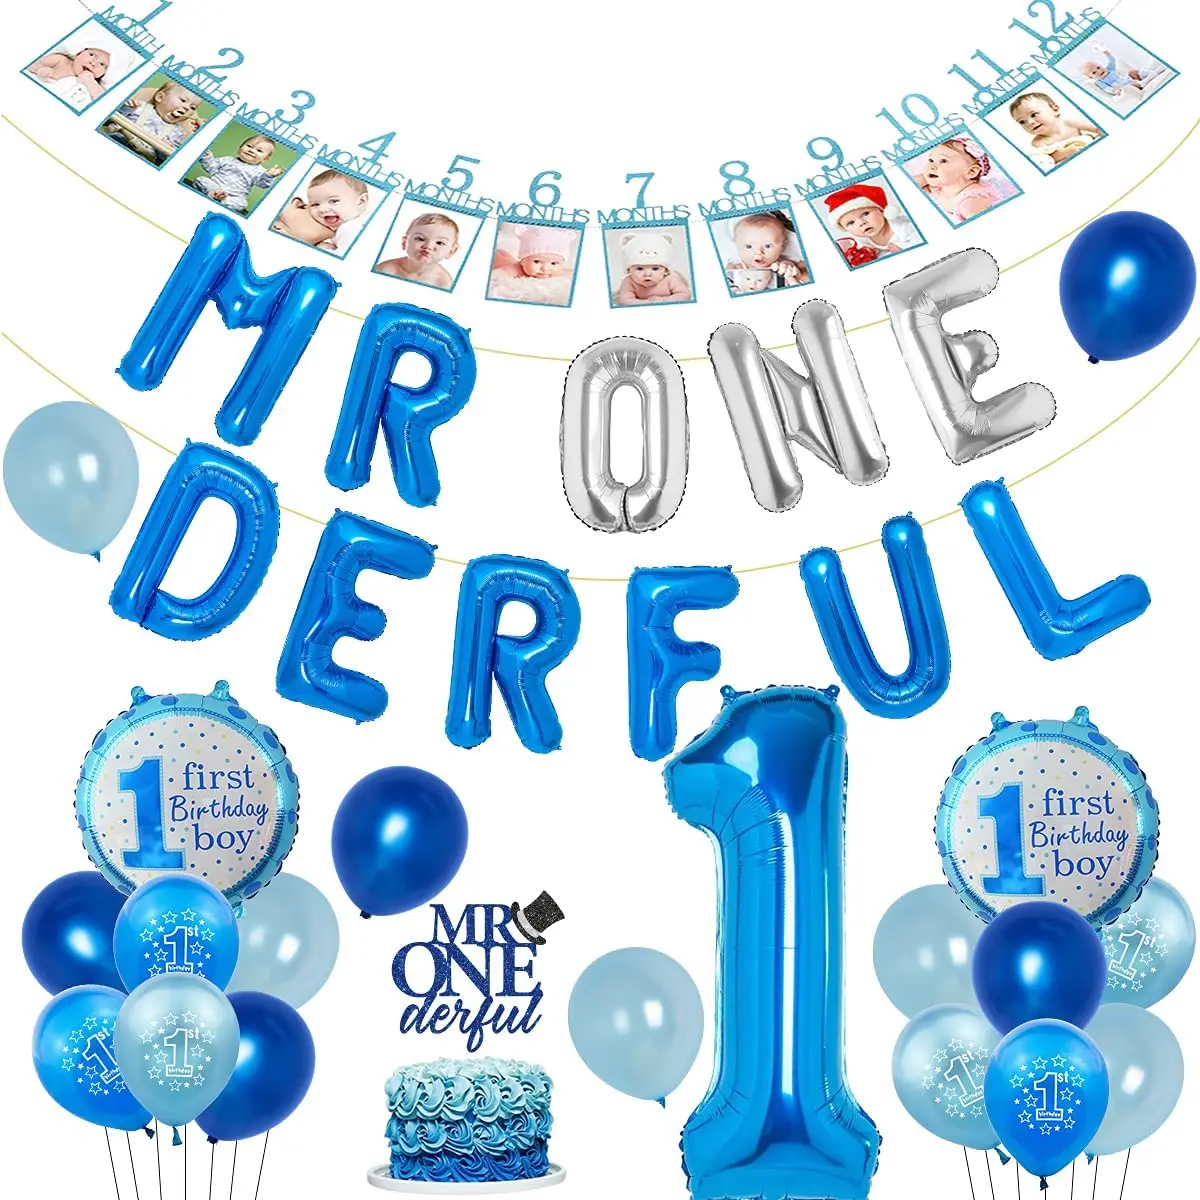 

Mr Onederful 1st Birthday Decorations Blue for Boys with Mr One Derful Balloons Banner Monthly Photo Banner Cake Topper Kit